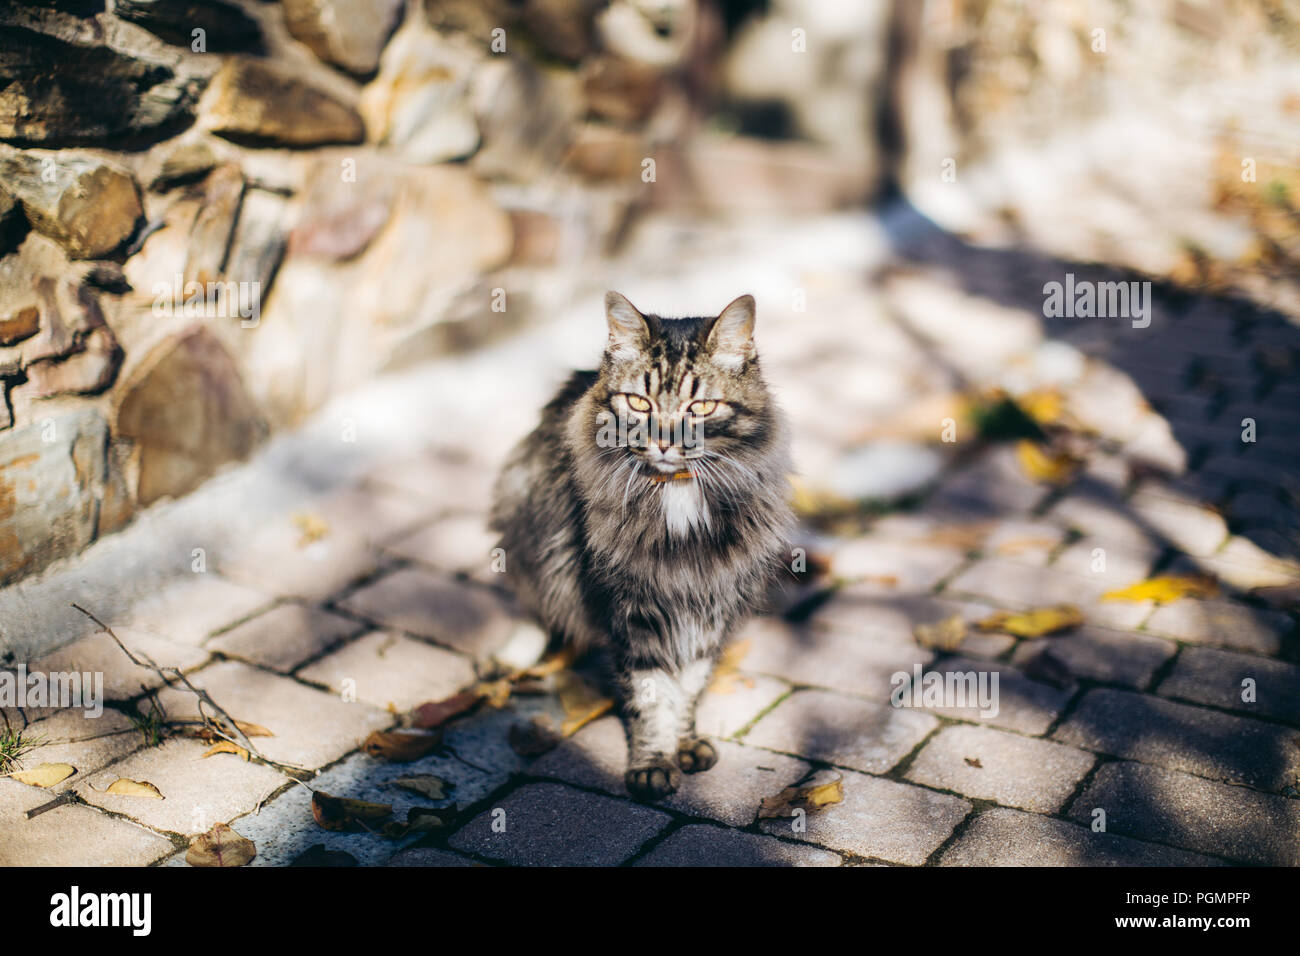 Furry cat sitting on the rocky road of a Spanish Old Town Stock Photo